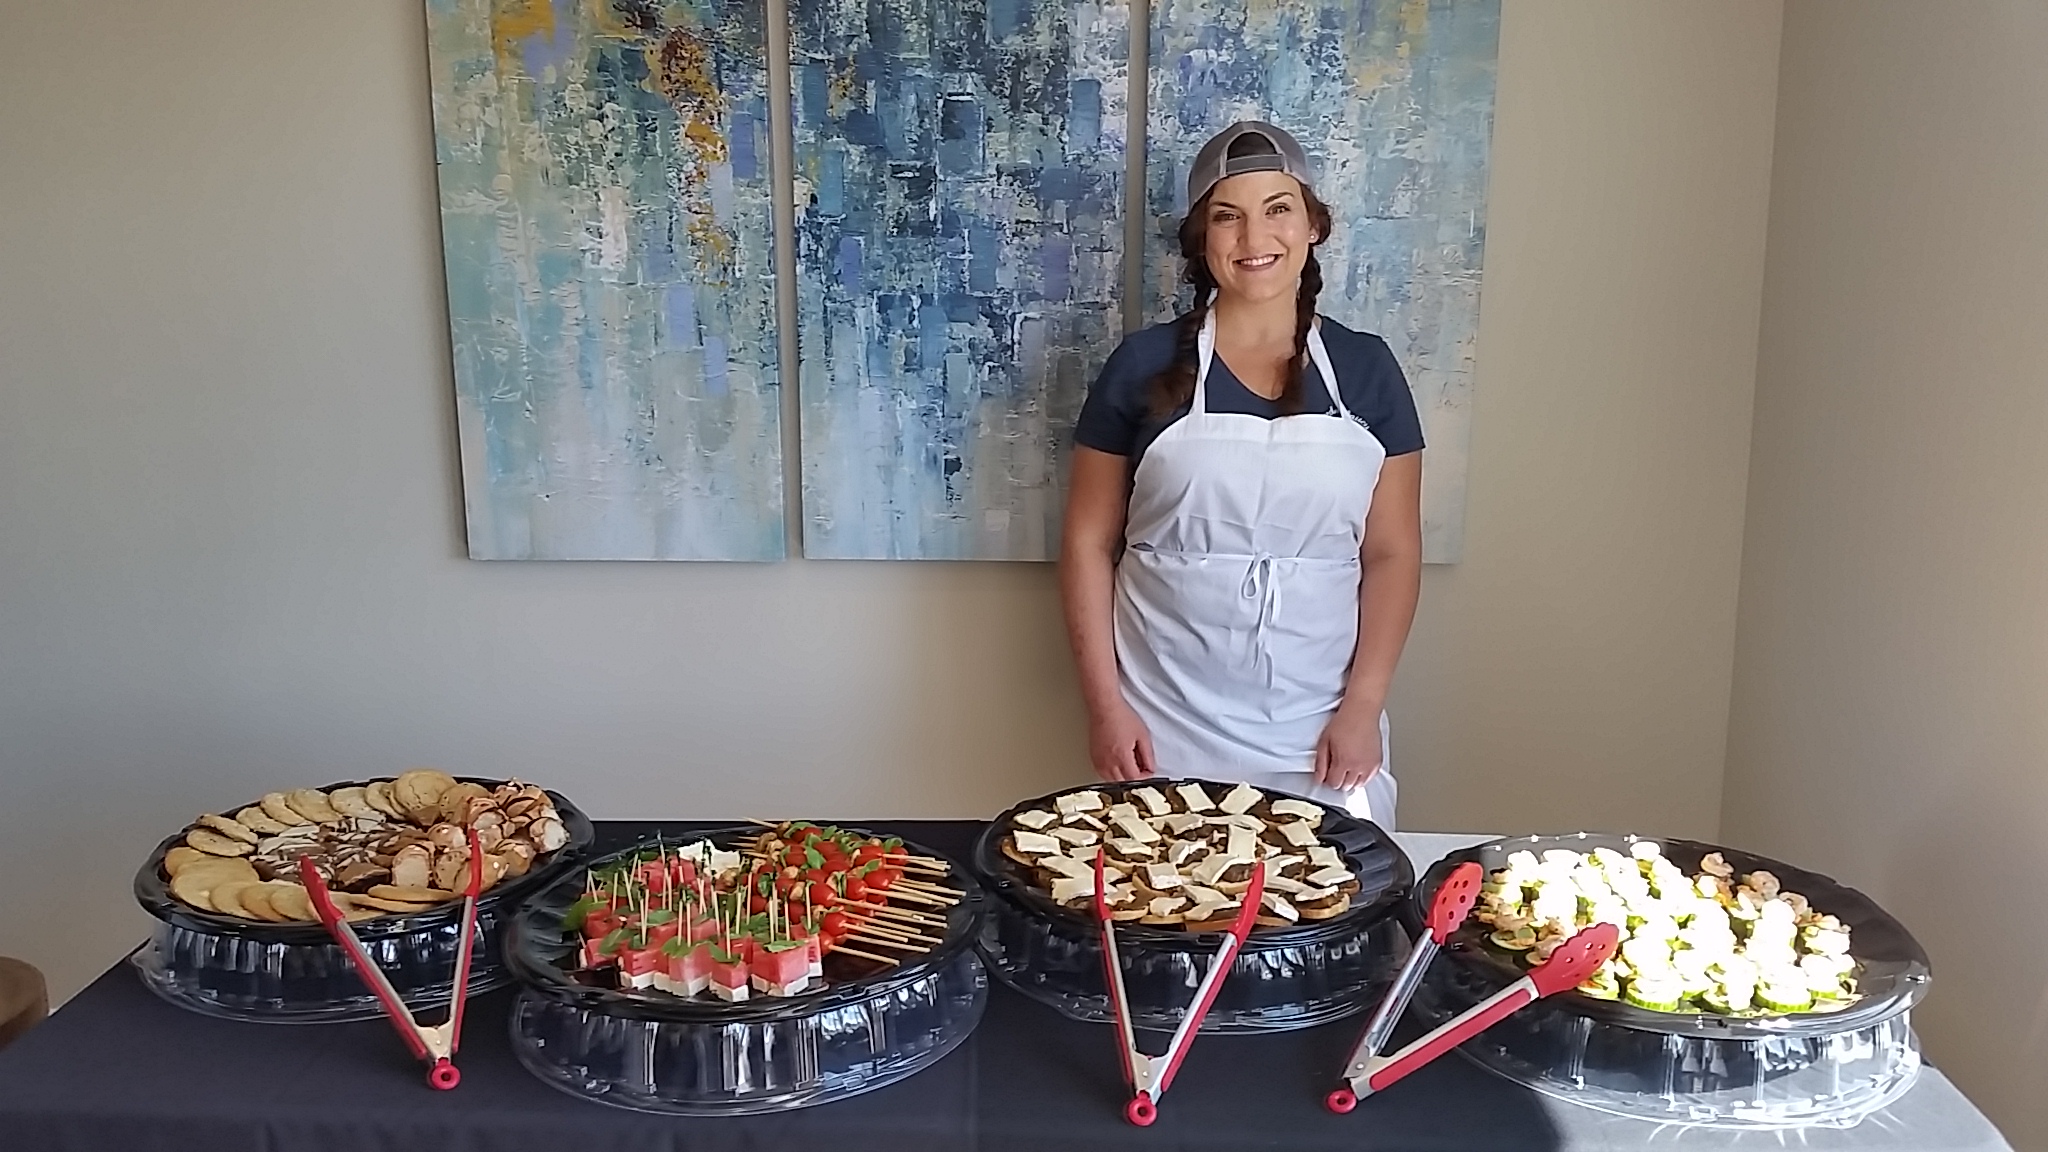 Ellise in front of abstract paintings and behind her food catering service